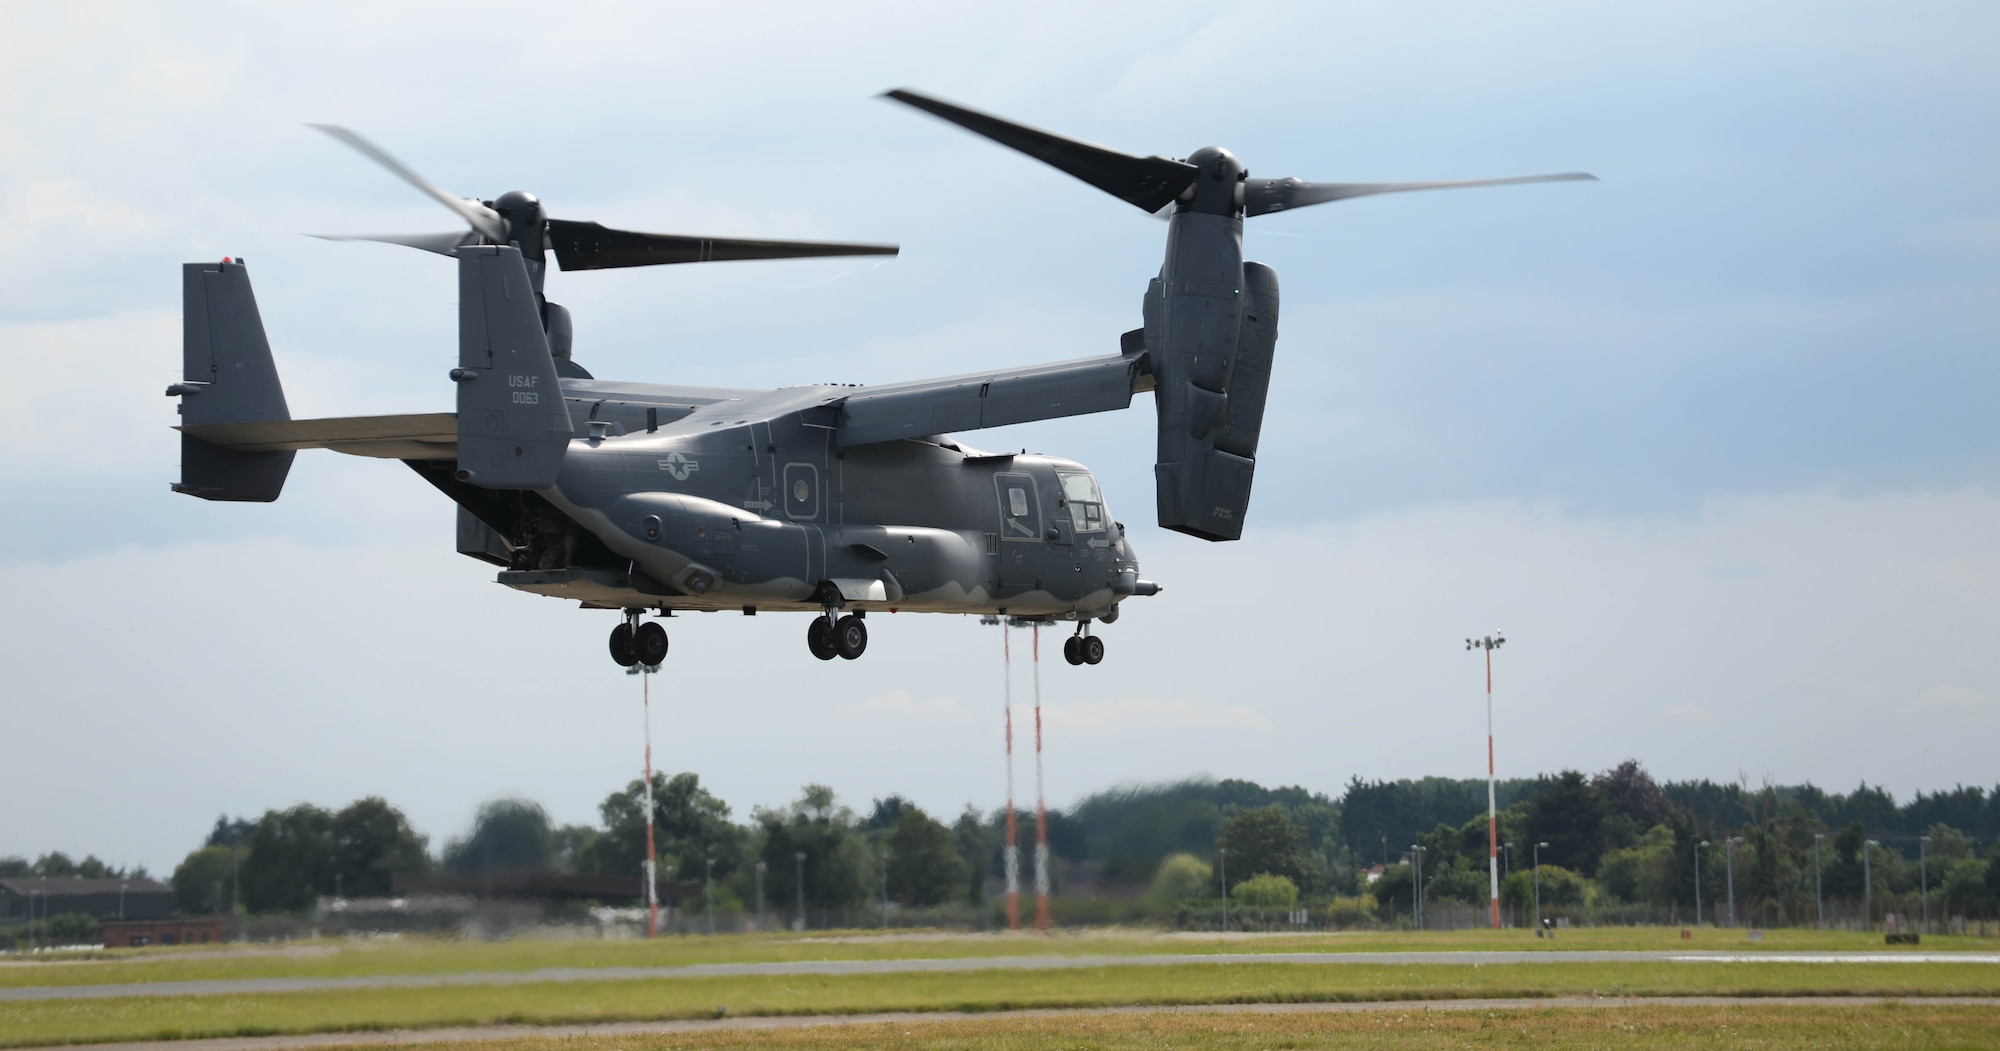 A U.S. Air Force CV-22 Osprey takes off Aug. 1, 2016, from RAF Mildenhall, England. The 352nd Special Operations Wing ended the tour for U.S. Army Maj. Gen. Mark C. Schwartz, commander of the Special Operations Command-Europe, with a flight. (U.S. Air Force photo by Airman 1st Class Tenley Long)